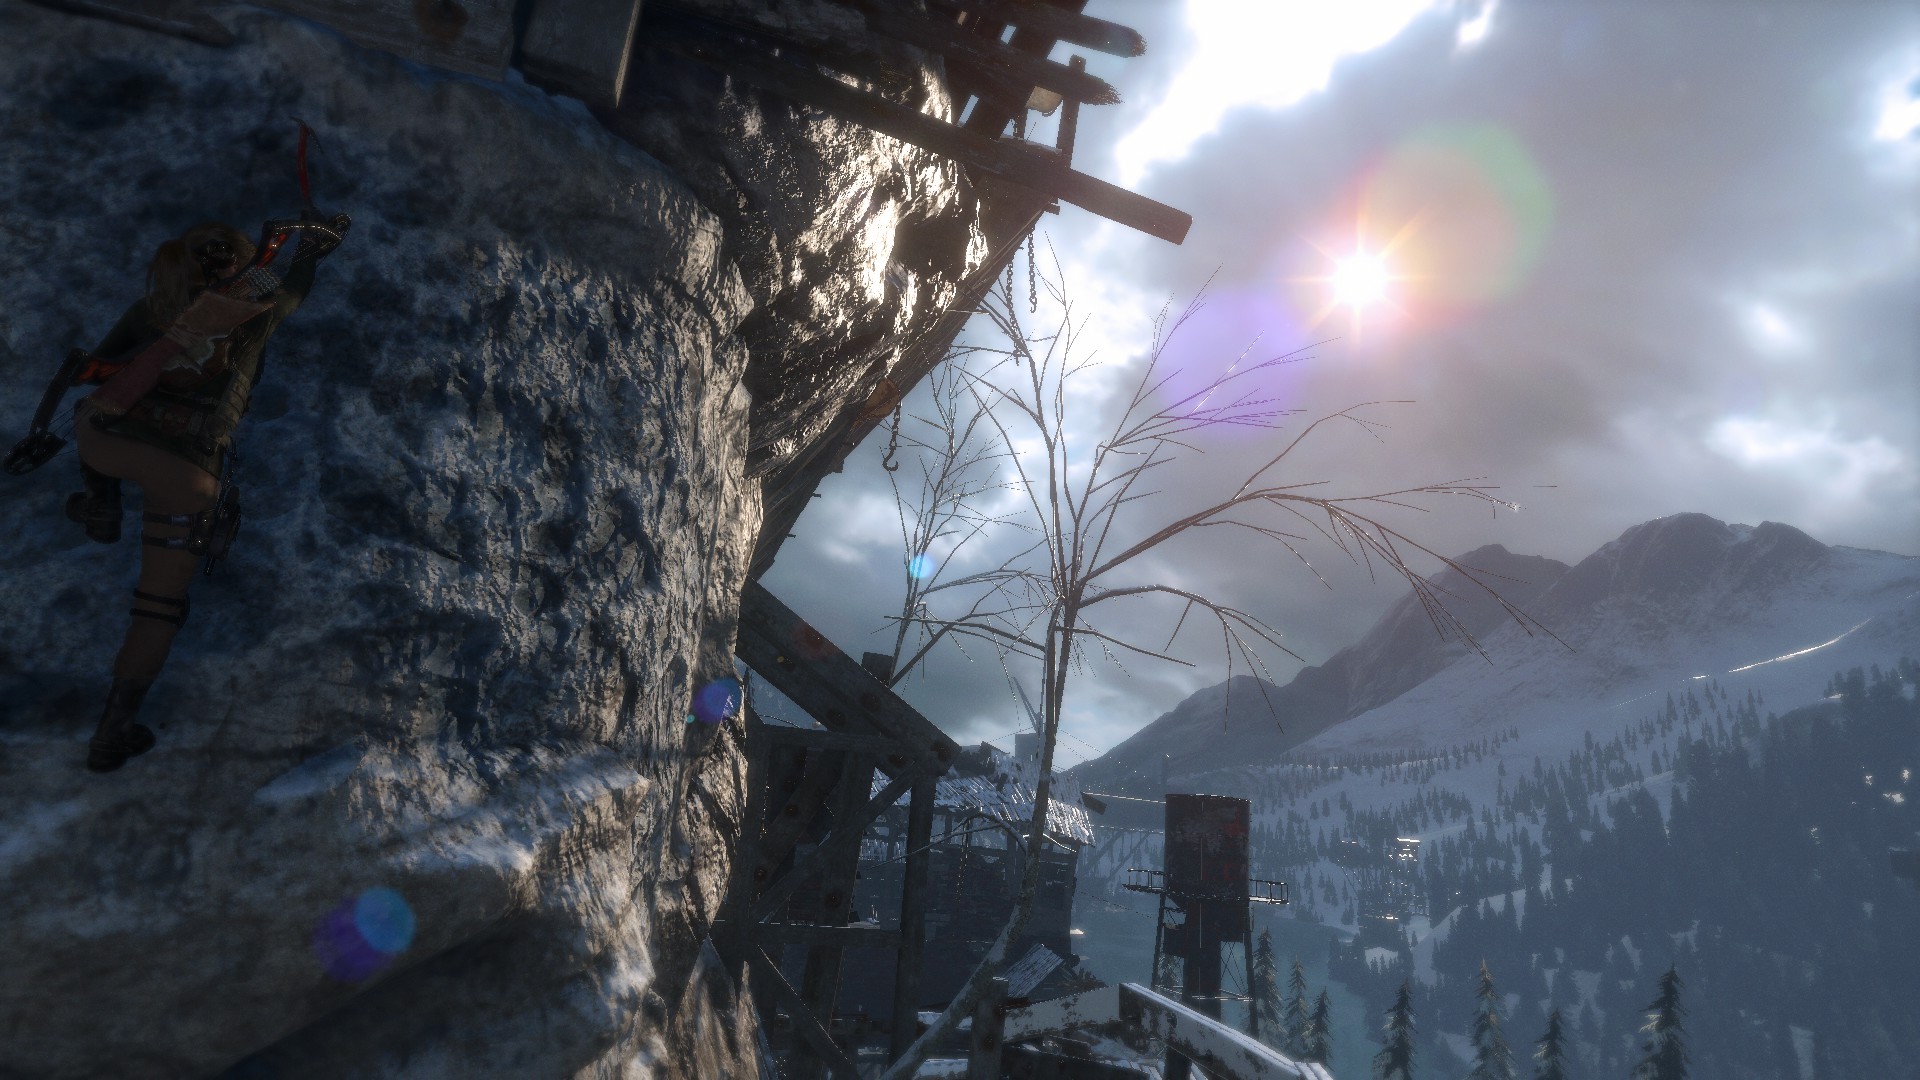 General 1920x1080 Rise of the Tomb Raider rear view winter snow mountains climbing brunette looking into the distance Lara Croft (Tomb Raider) rock climbing screen shot video games PC gaming